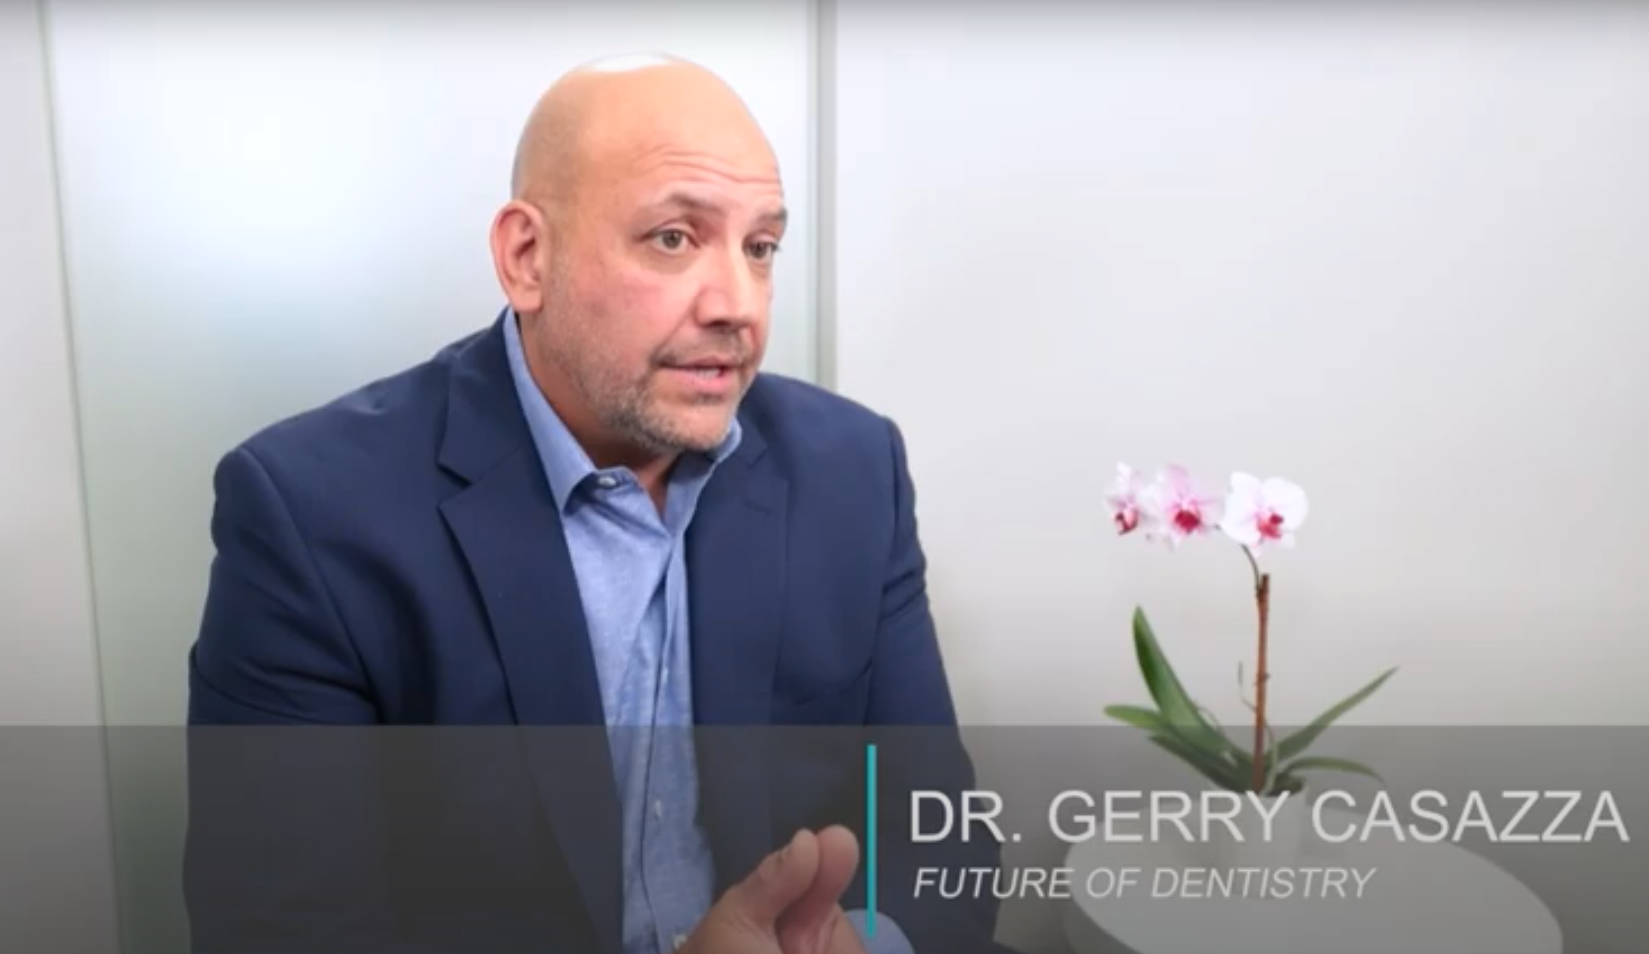 Video of Dr. Gerry Casazza explaining our dental technology at Future of Dentistry, with locations including North Andover, MA